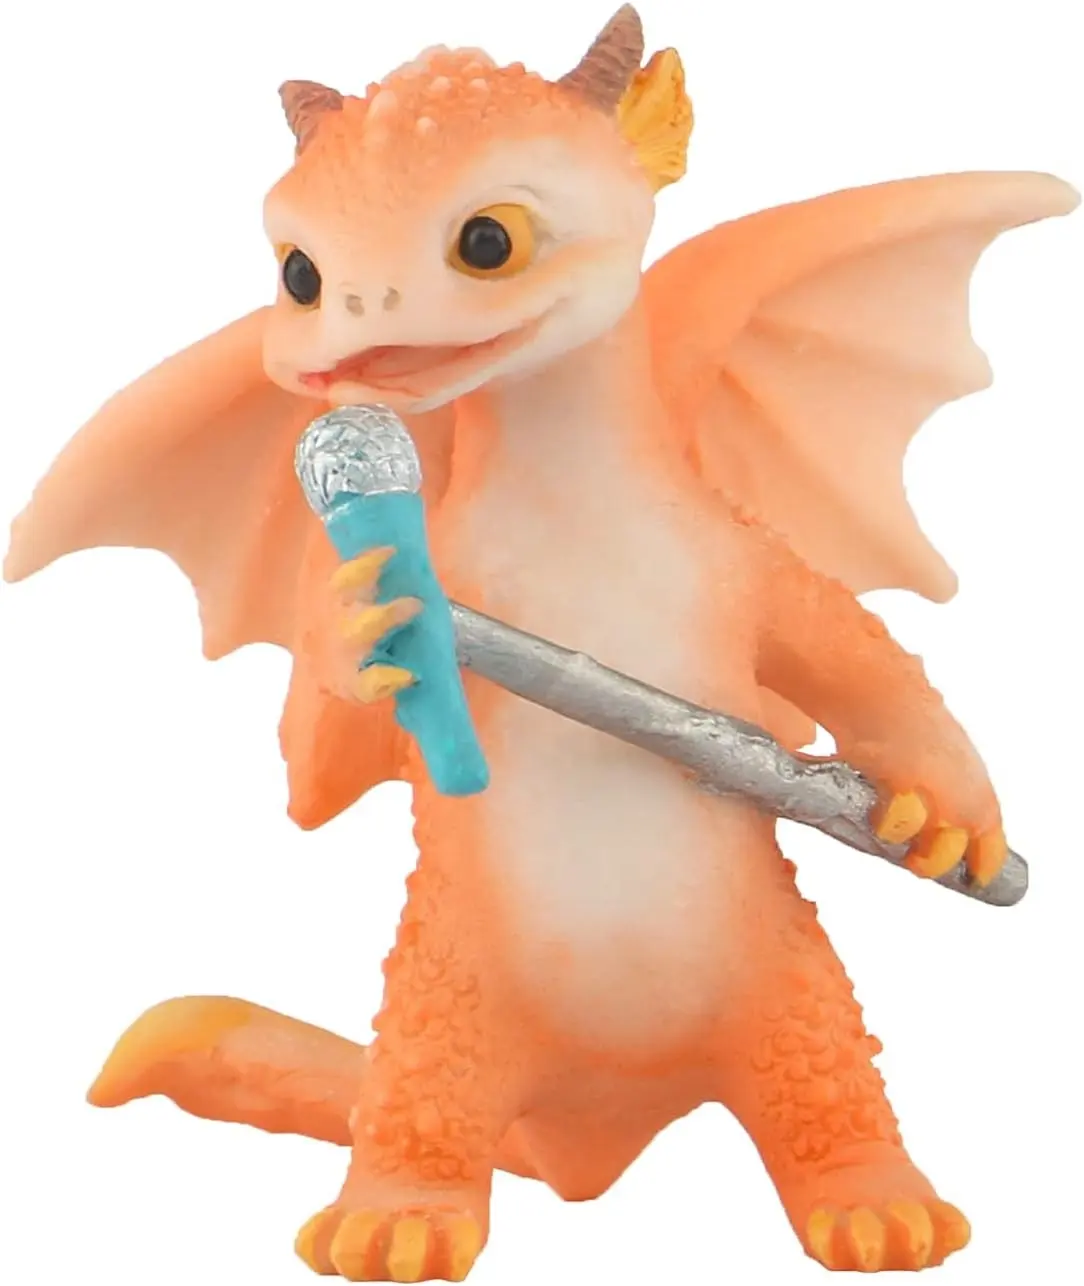 Z16211A Birthday Gift Articles Orange Color Dragon Singing Song With Microphone Cartoon Style Polyresin Items Souvenir